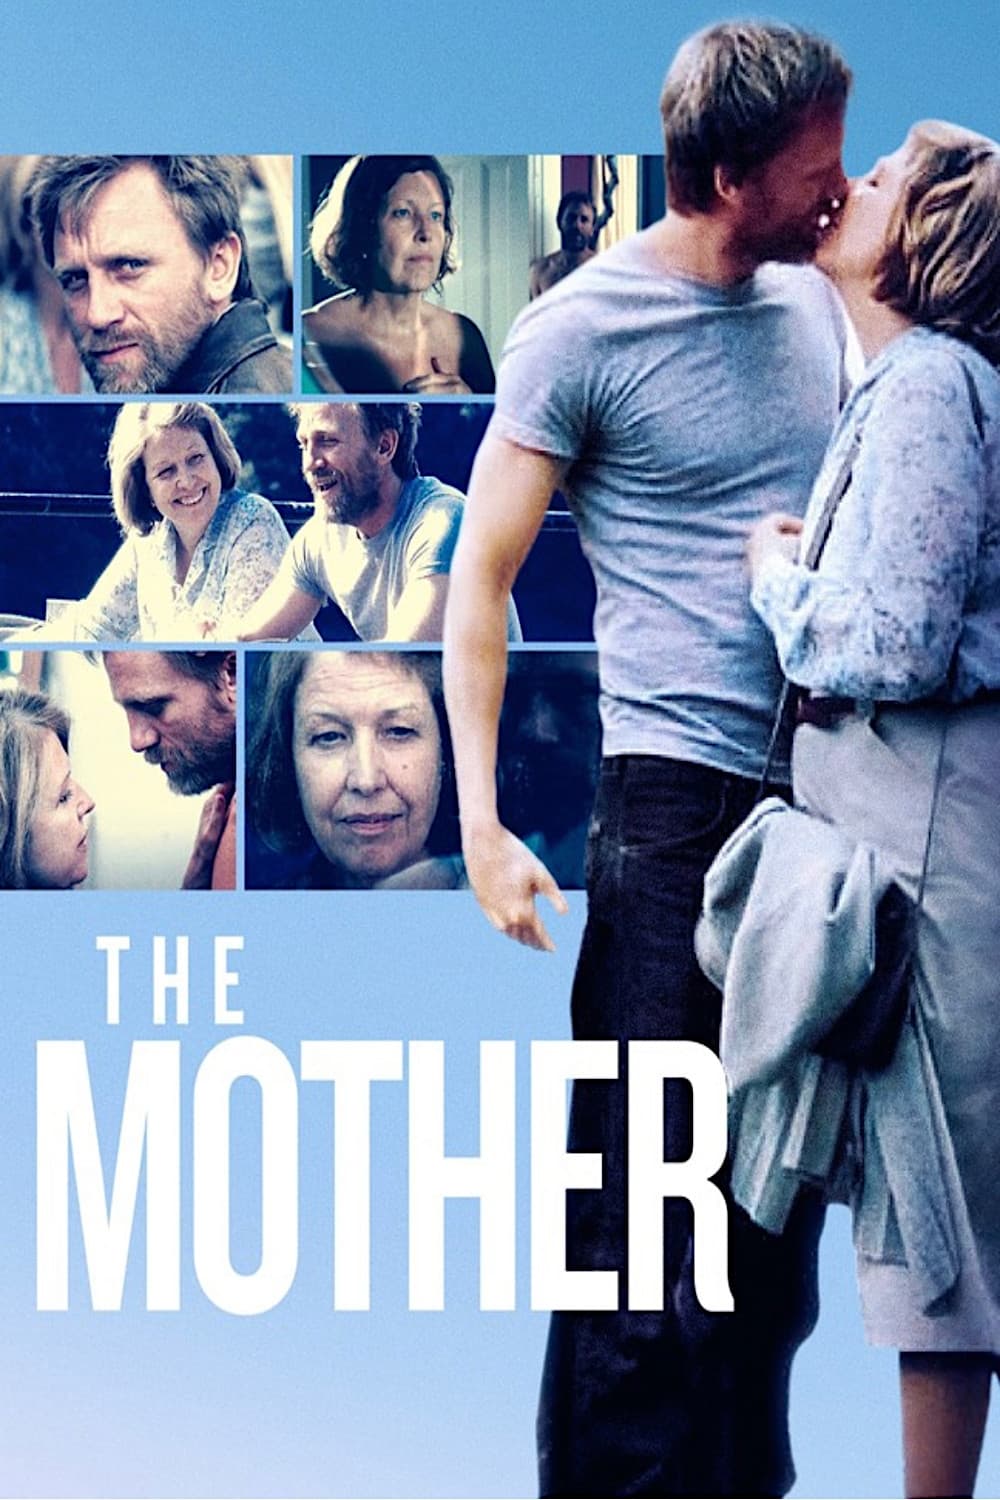 The Mother (2003)